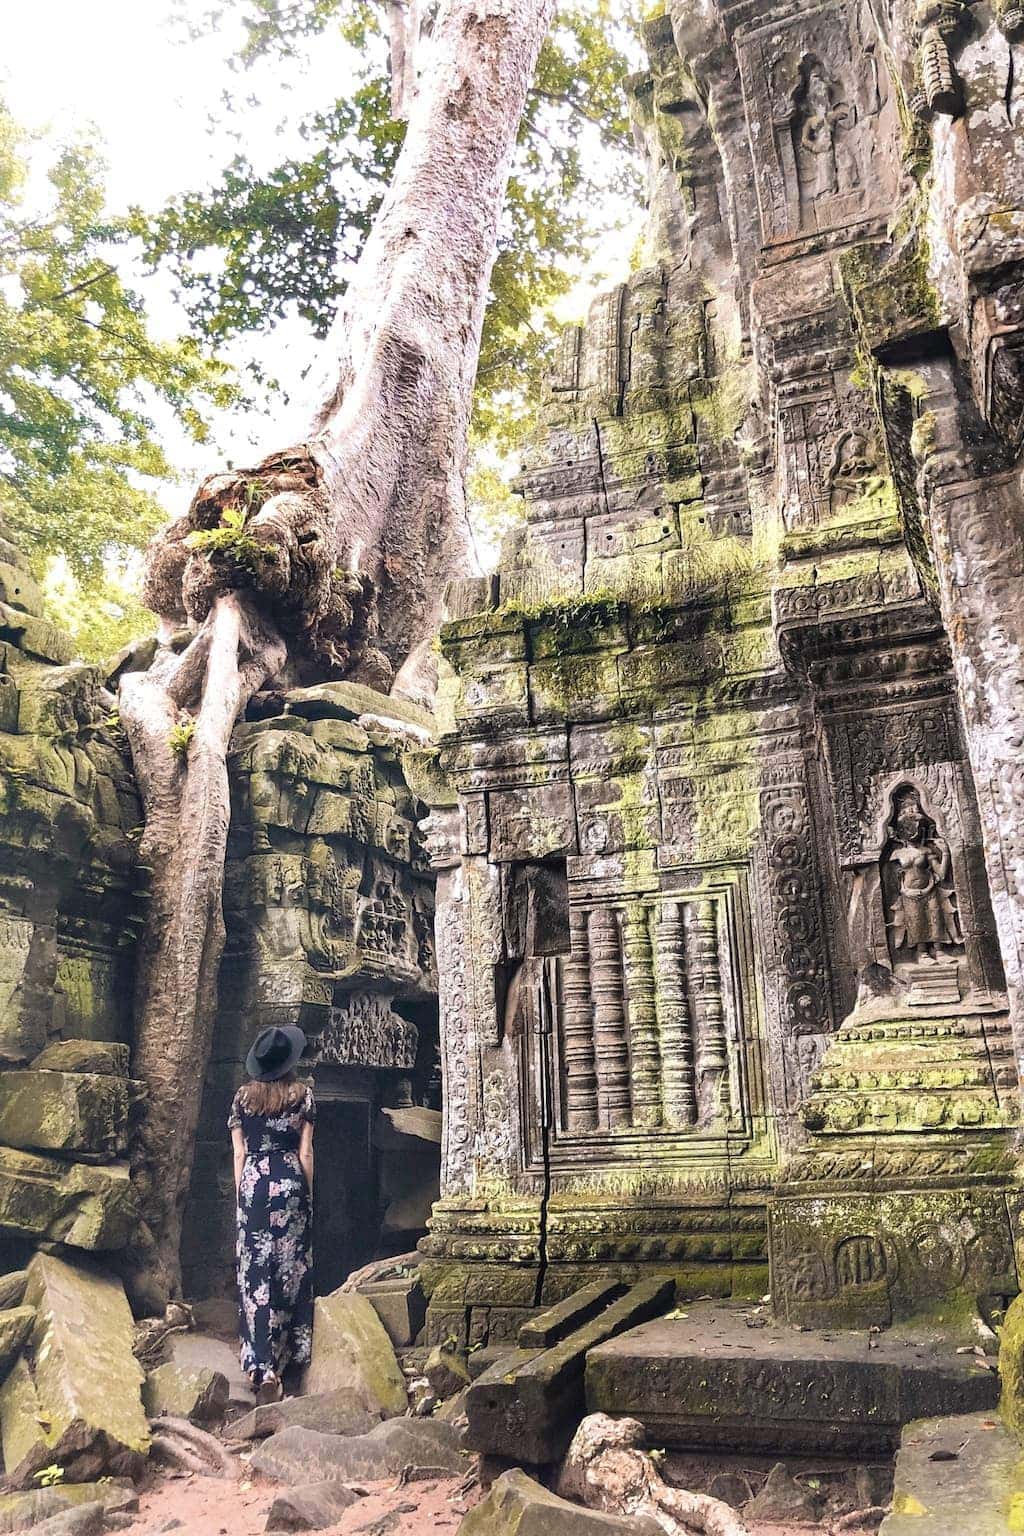 Temples in Siem Reap: Tomb Raider temple